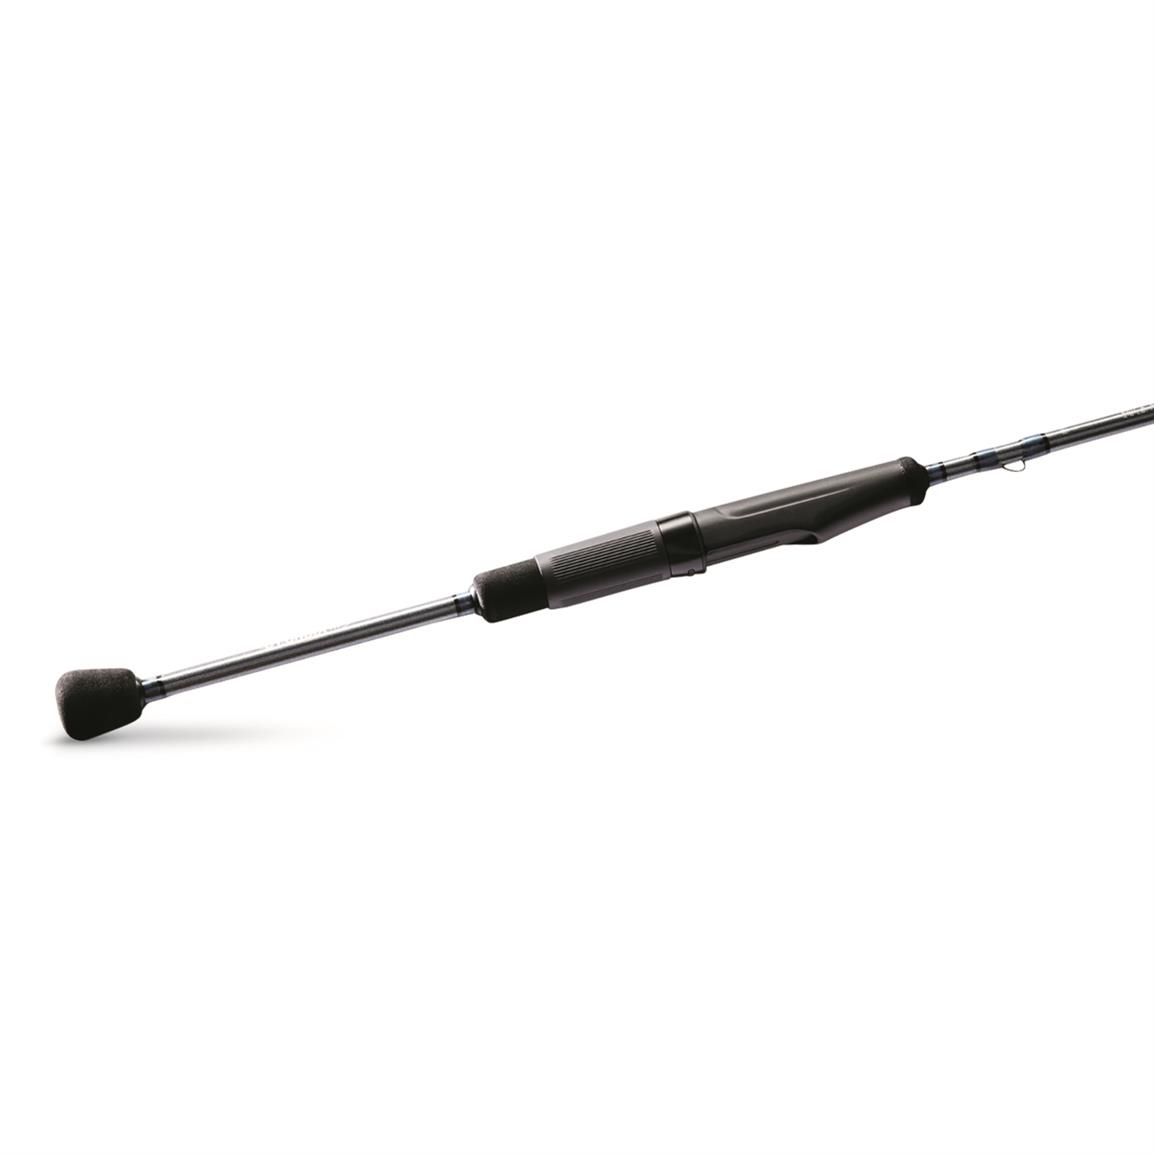 St. Croix Trout Series Spinning Rod, 5'6" Length, Ultra Light Power, Fast Action